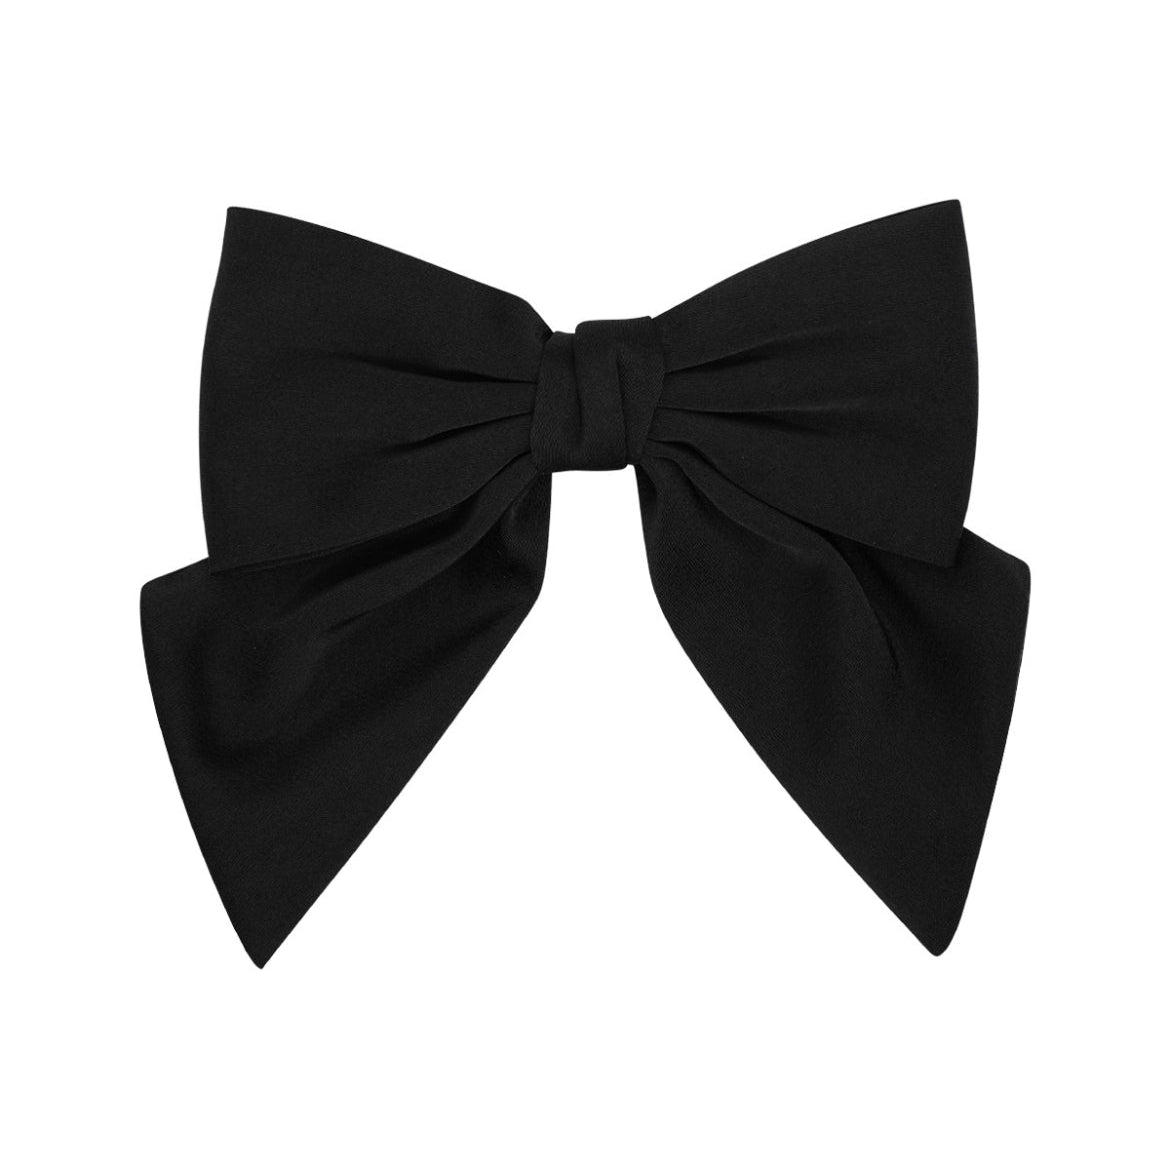 HAIRBOW BLACK - My Favourites